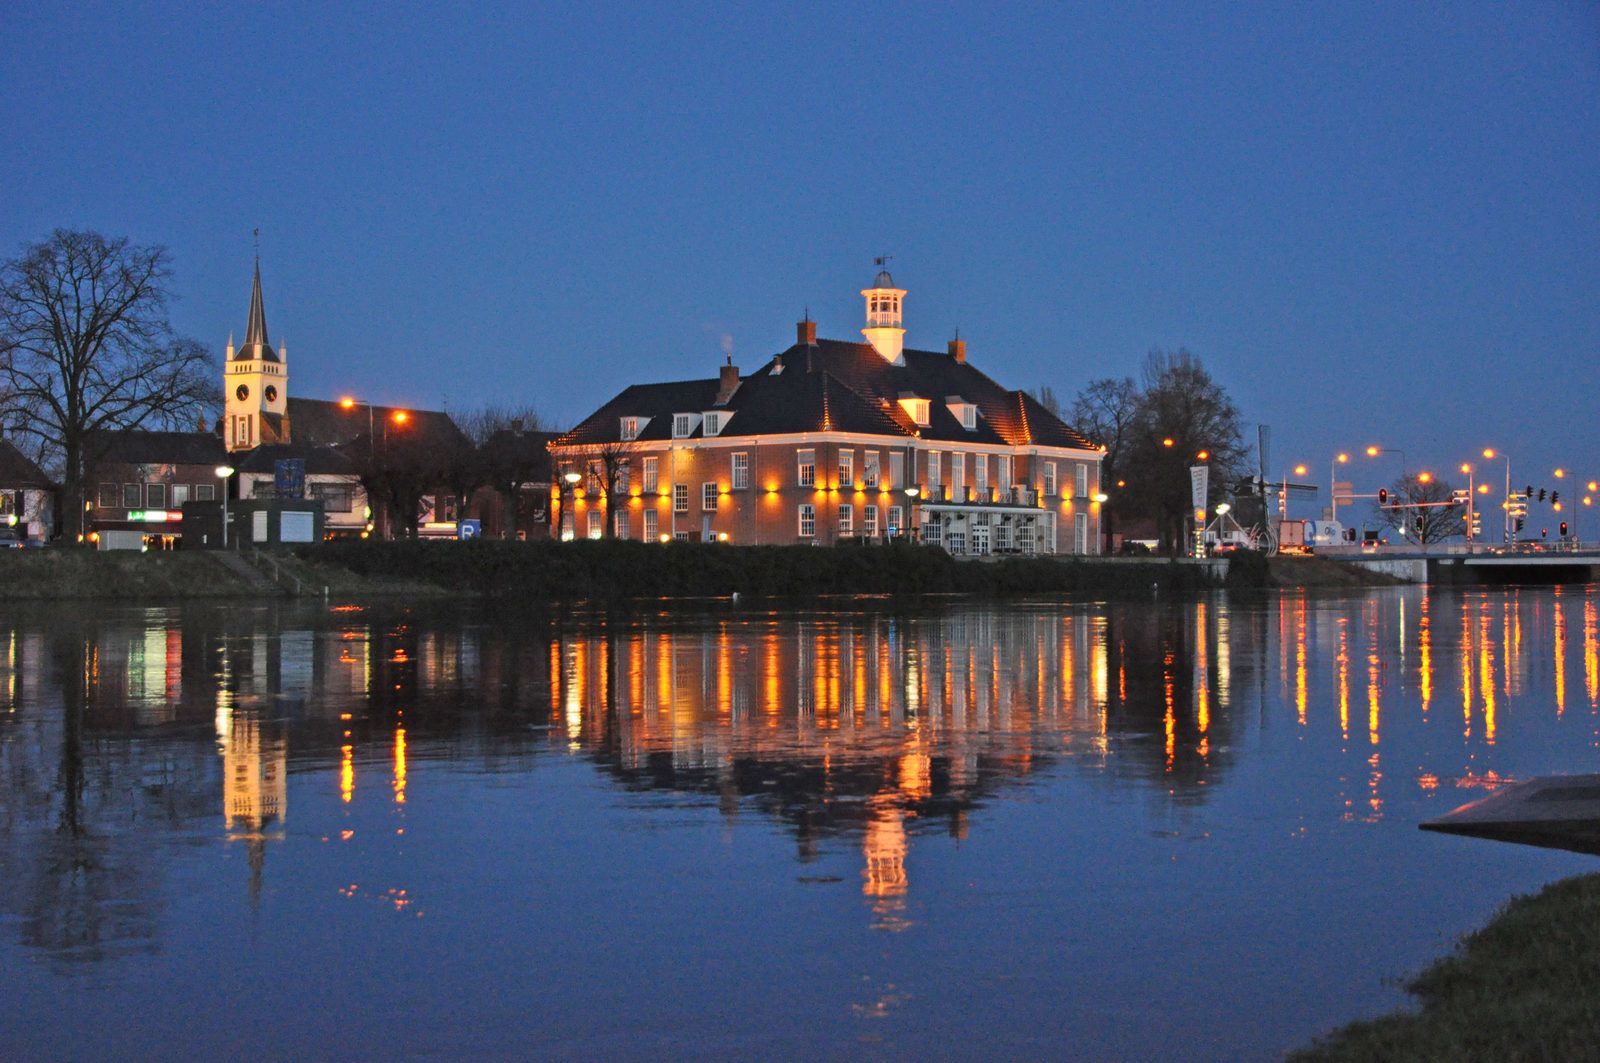 Discover the picturesque city of Ommen